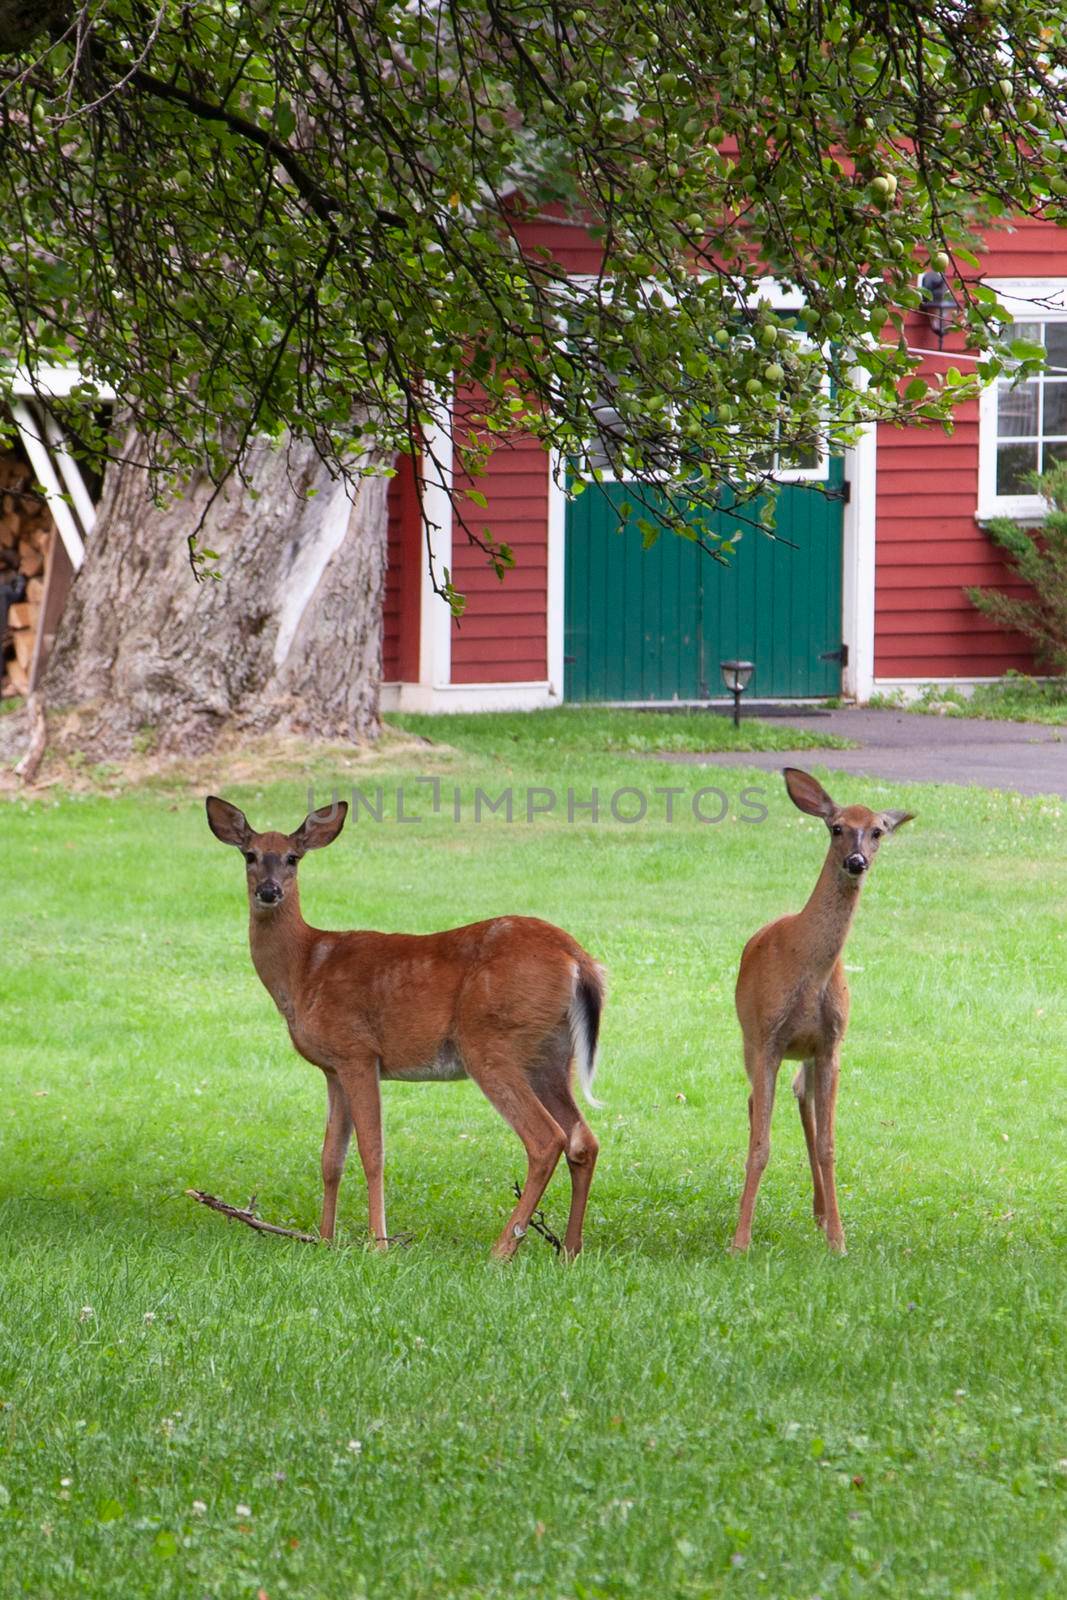 two little deer stand curiously in the backyard looking at the photographer